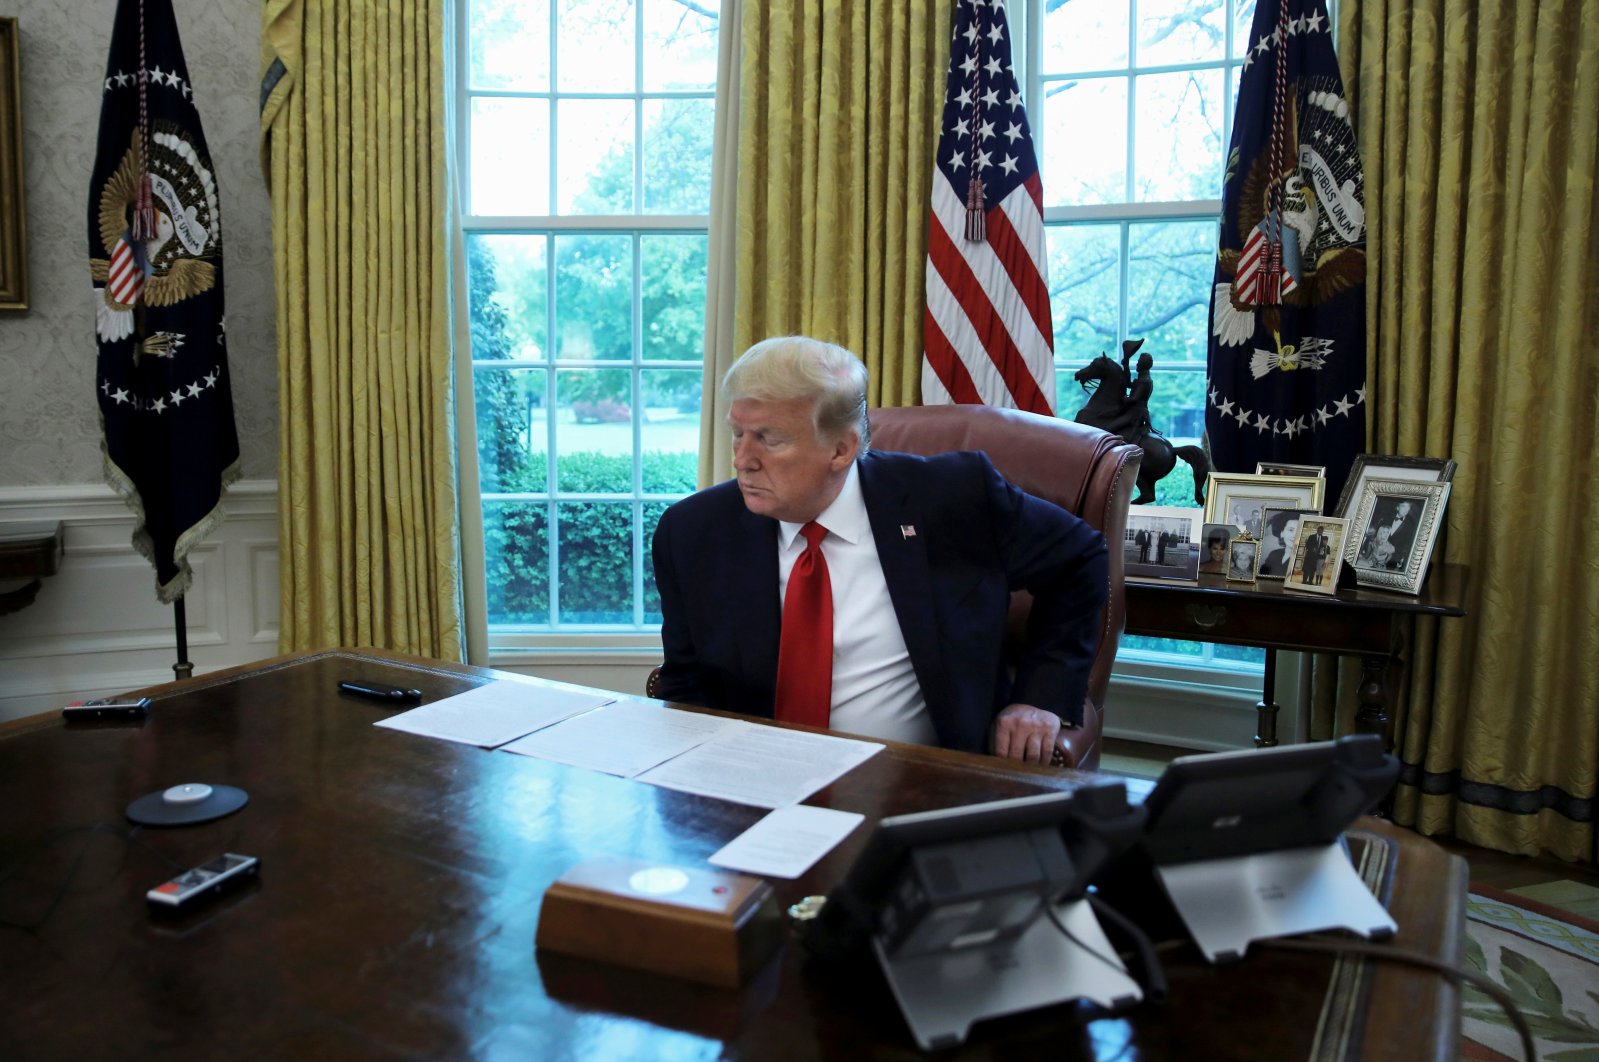 U.S. President Donald Trump looks at his briefing papers at the start of an interview with Reuters about China, in the Oval Office of the White House in Washington, D.C., U.S., April 29, 2020. (Reuters Photo)